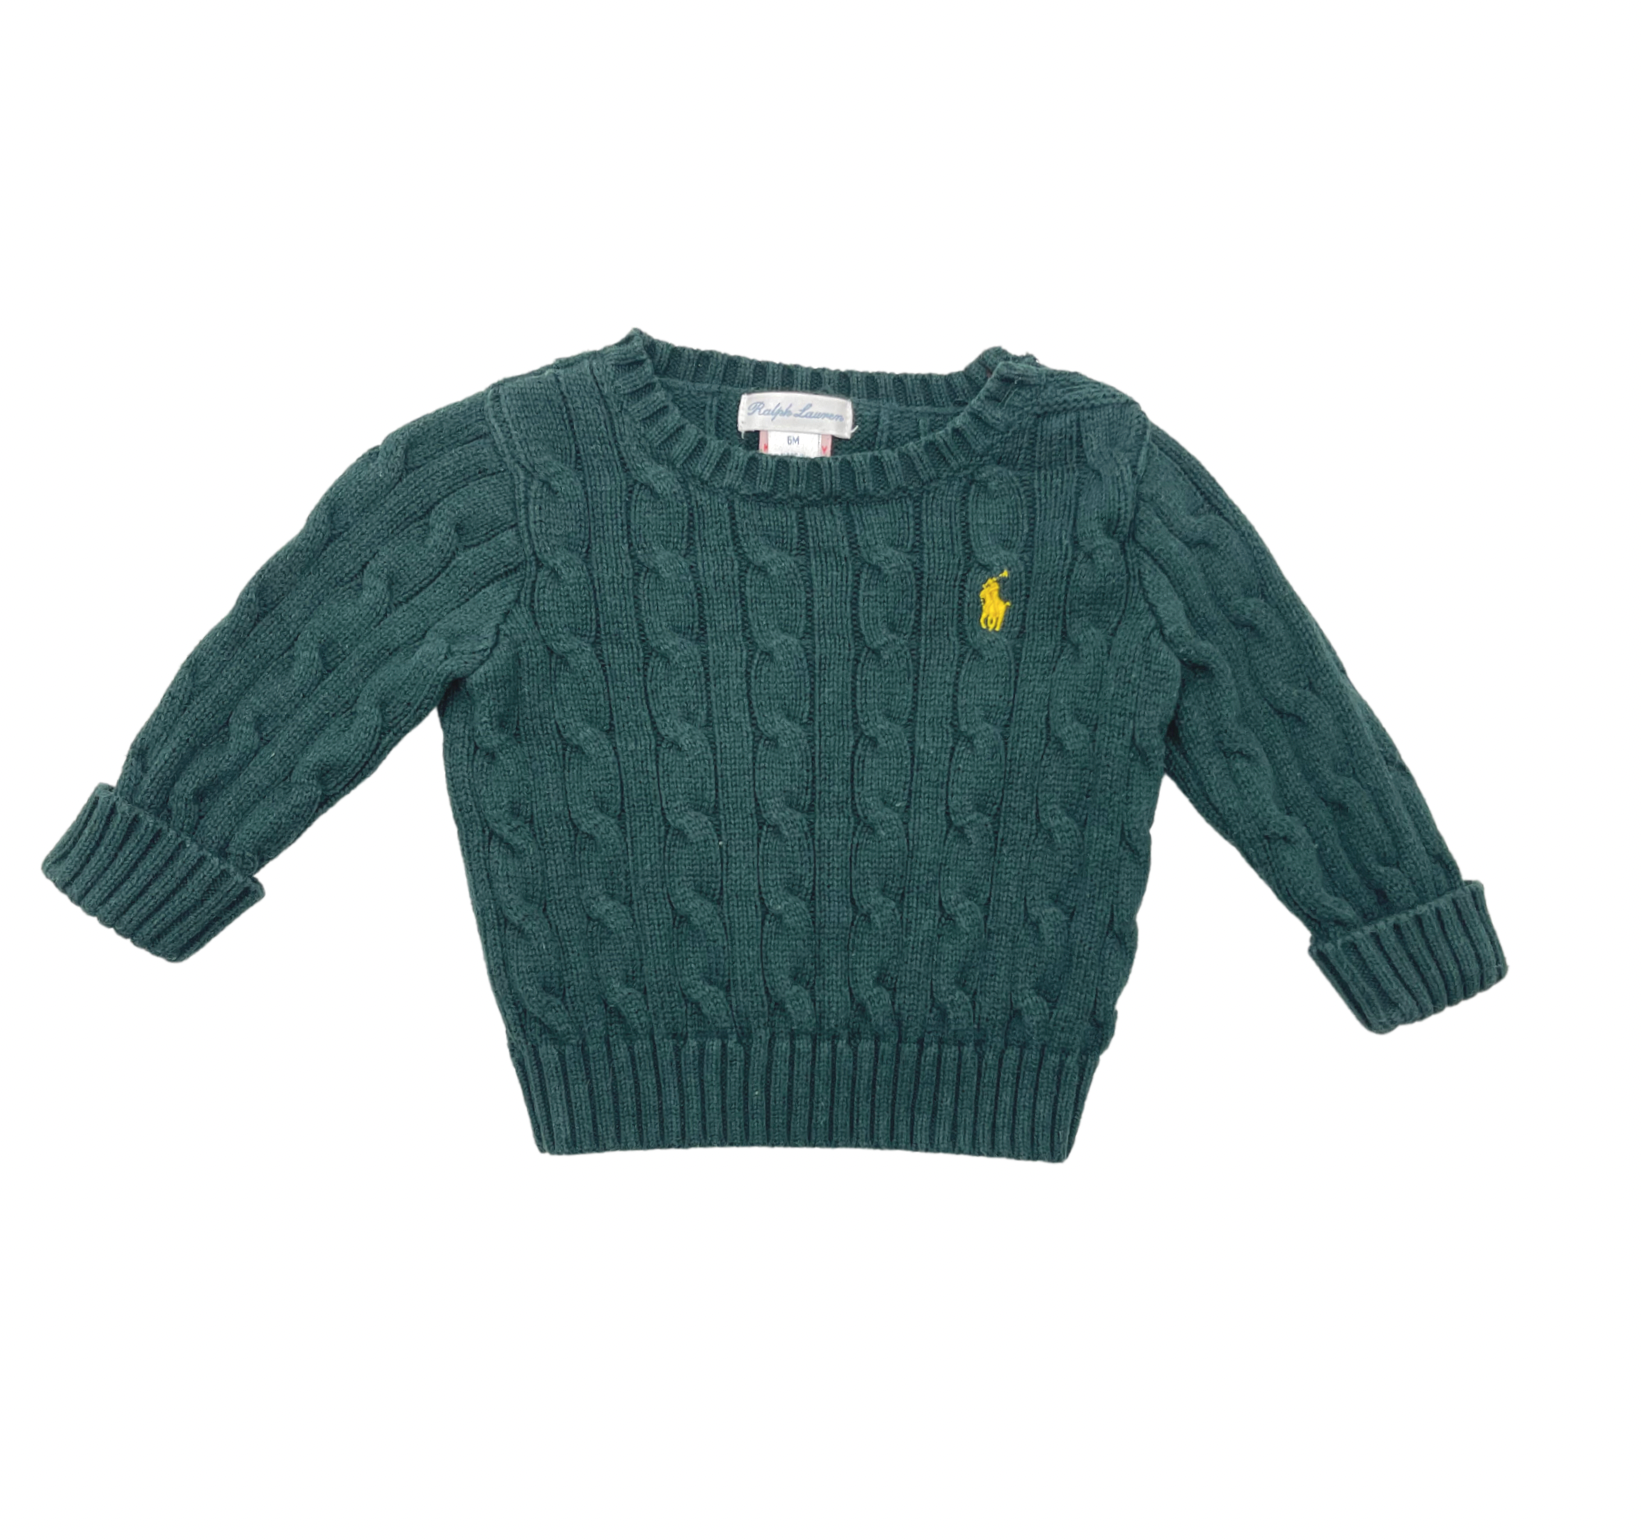 RALPH LAUREN - Cable knit sweater in green cotton - 6 months